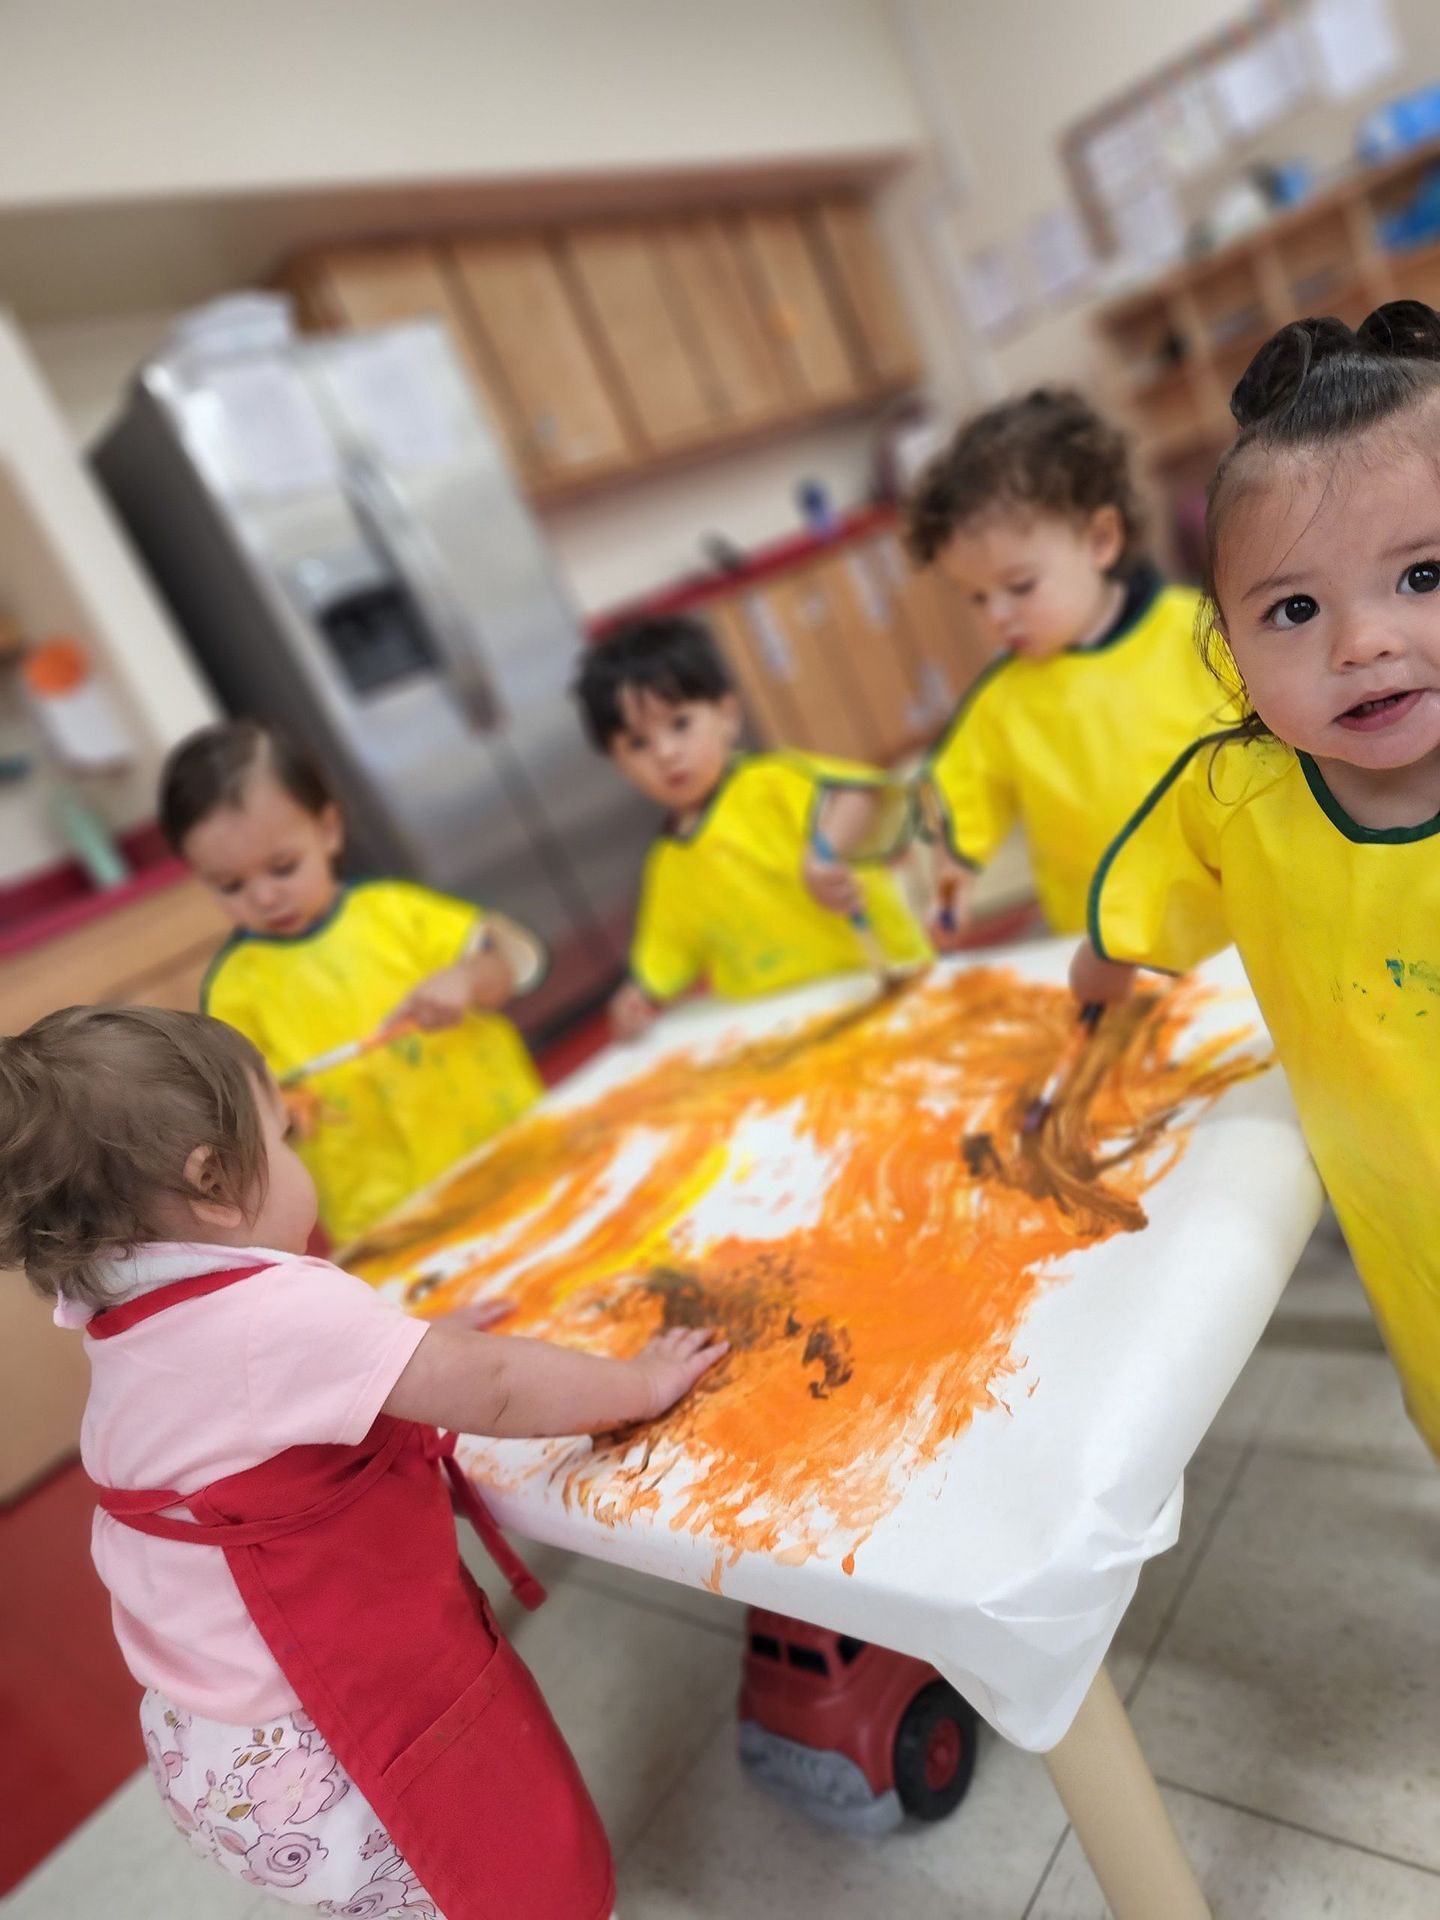 a group of young children are painting on a table .
